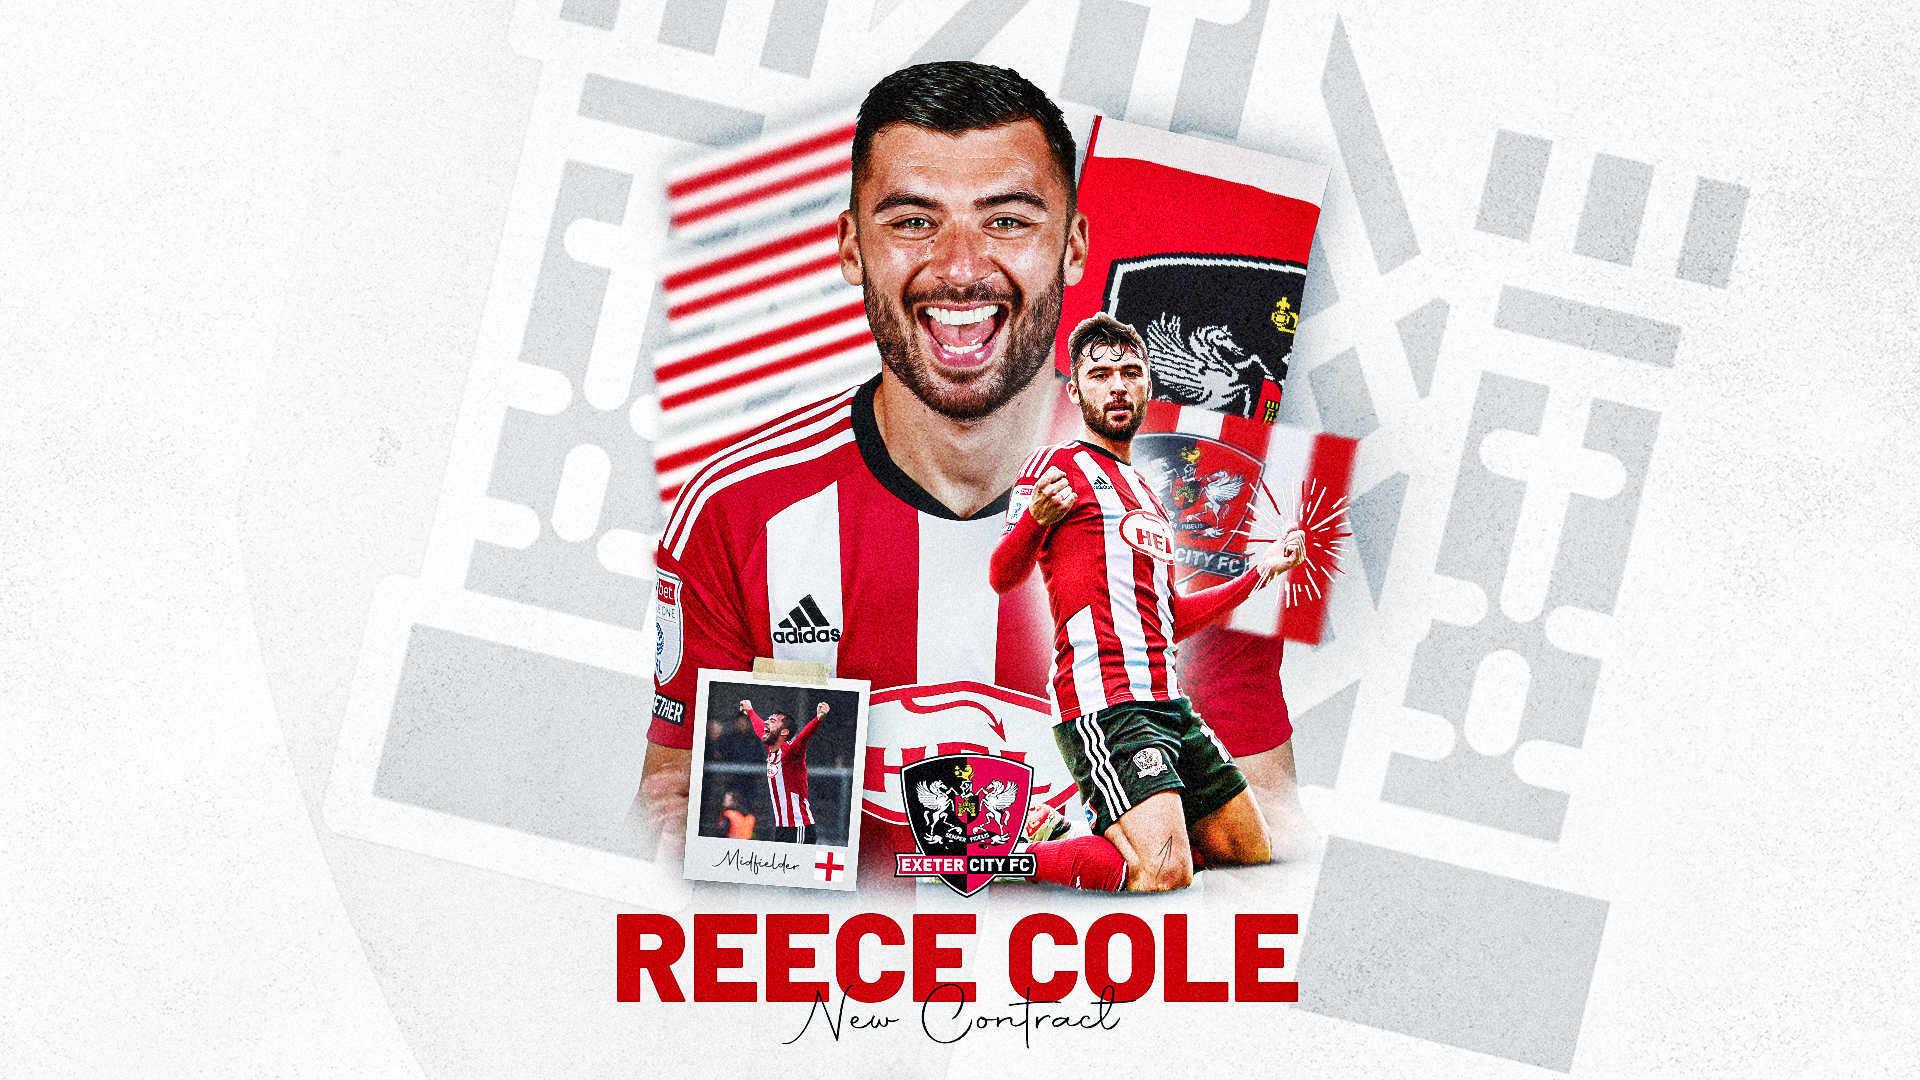 Reece Cole contract extension image